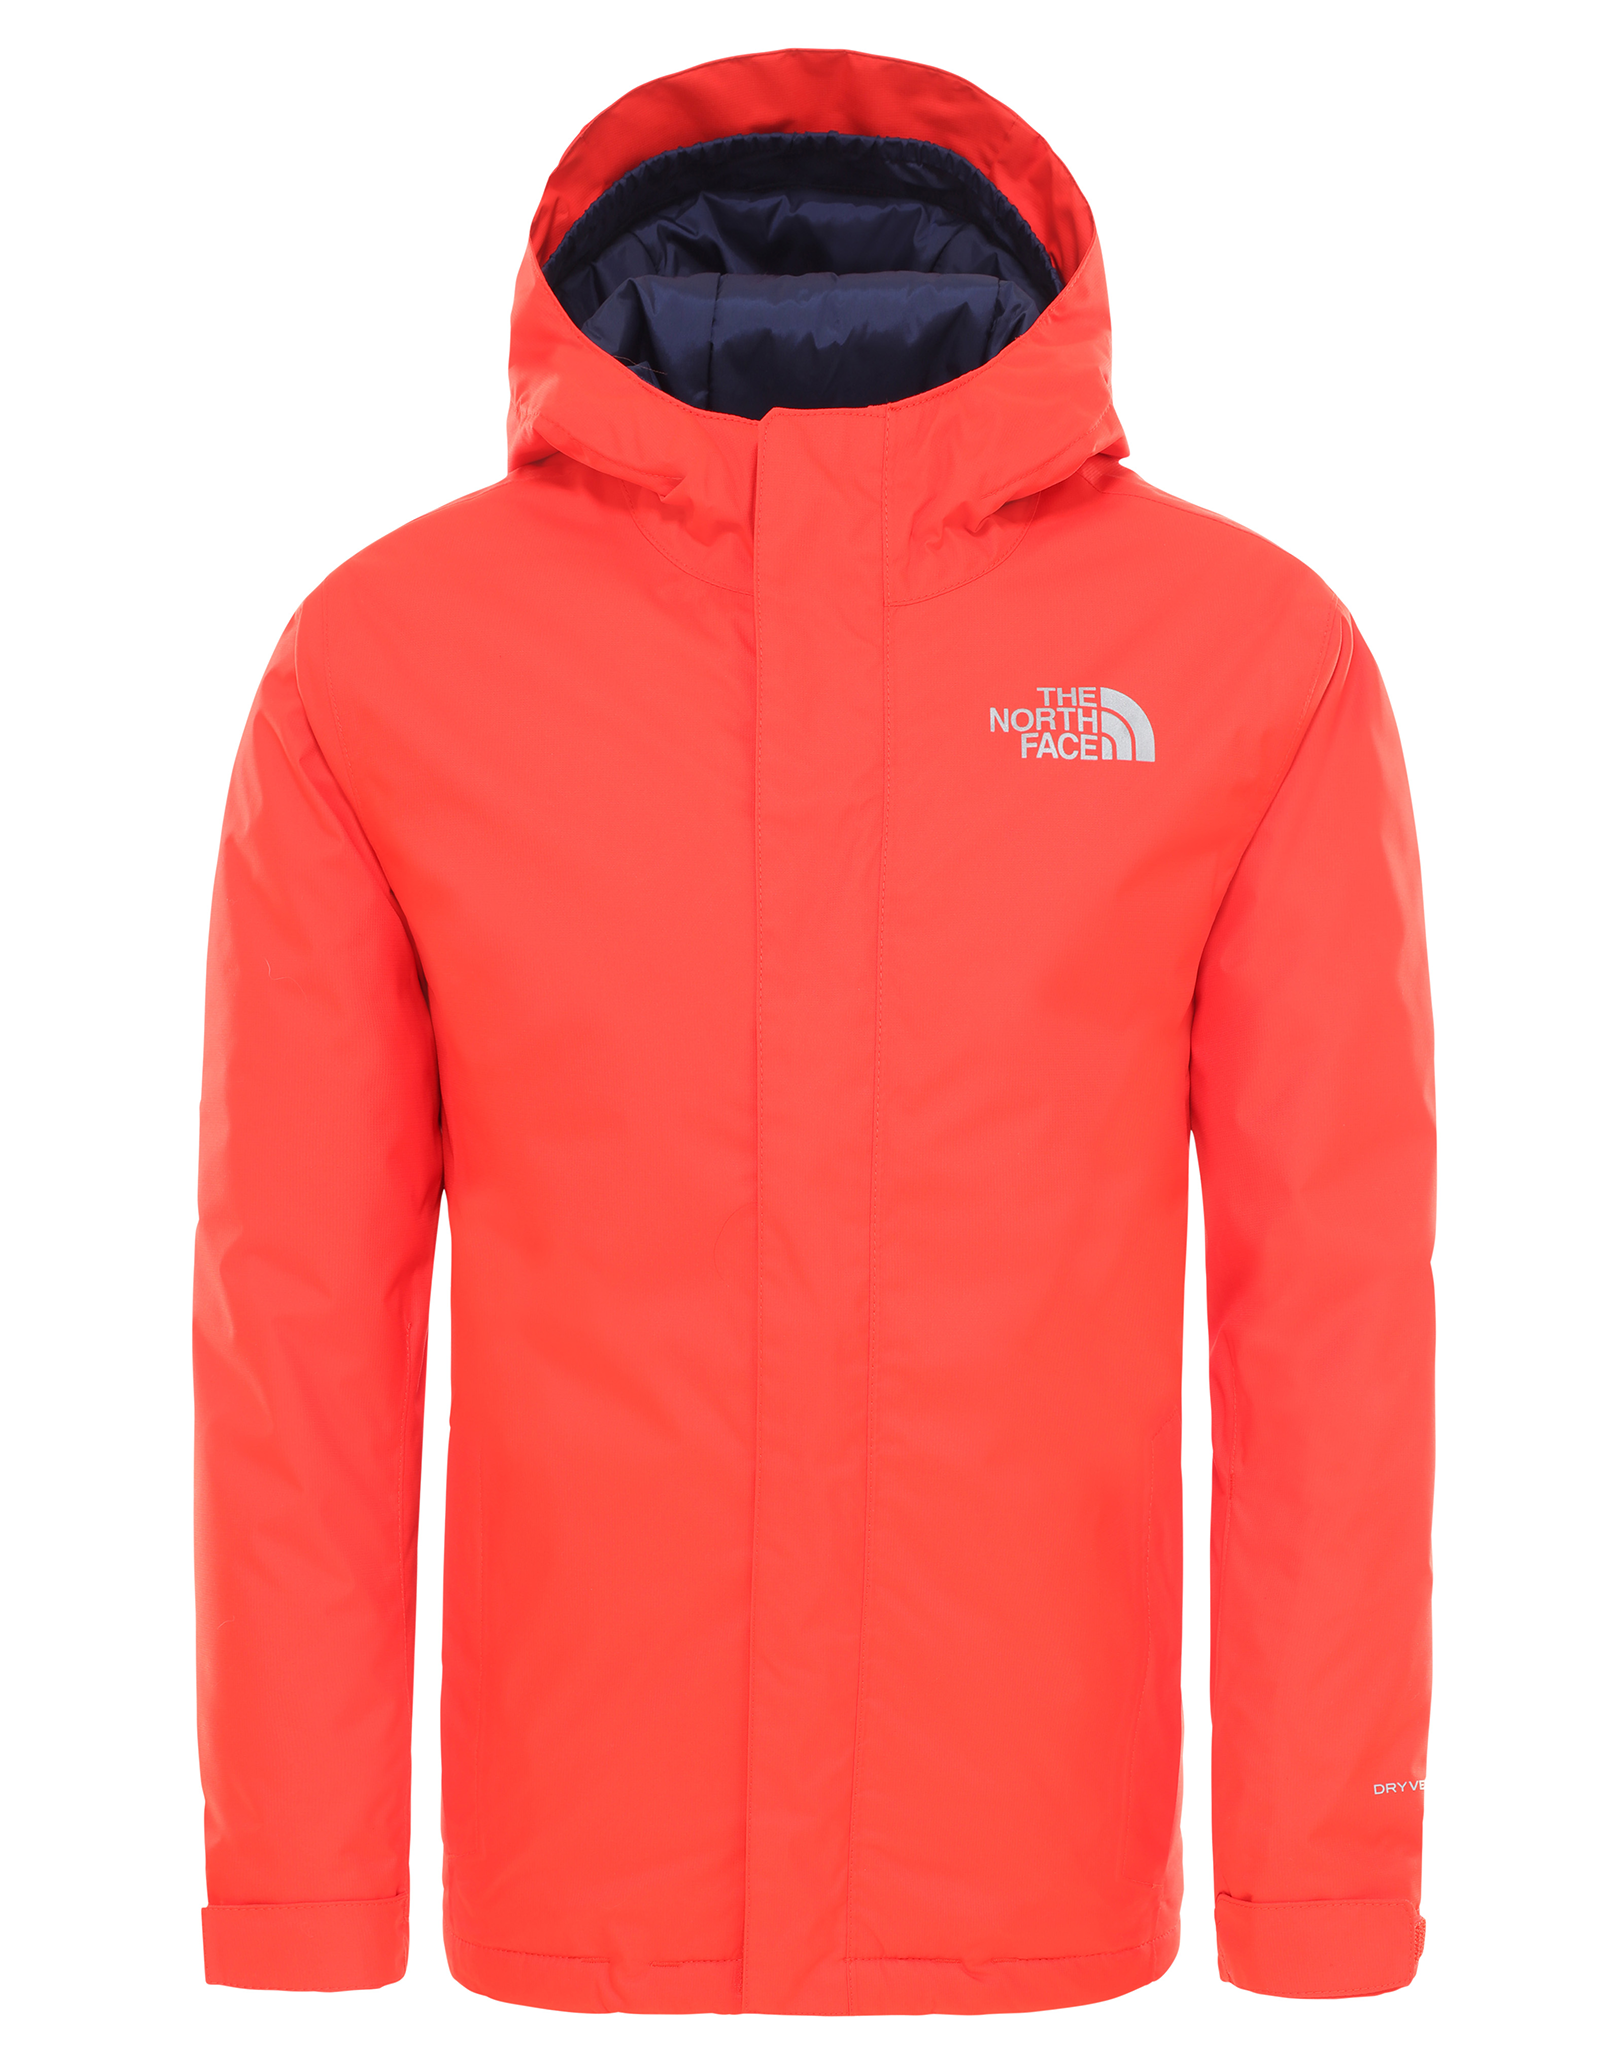 The North Face Kids Snowquest Jacket 